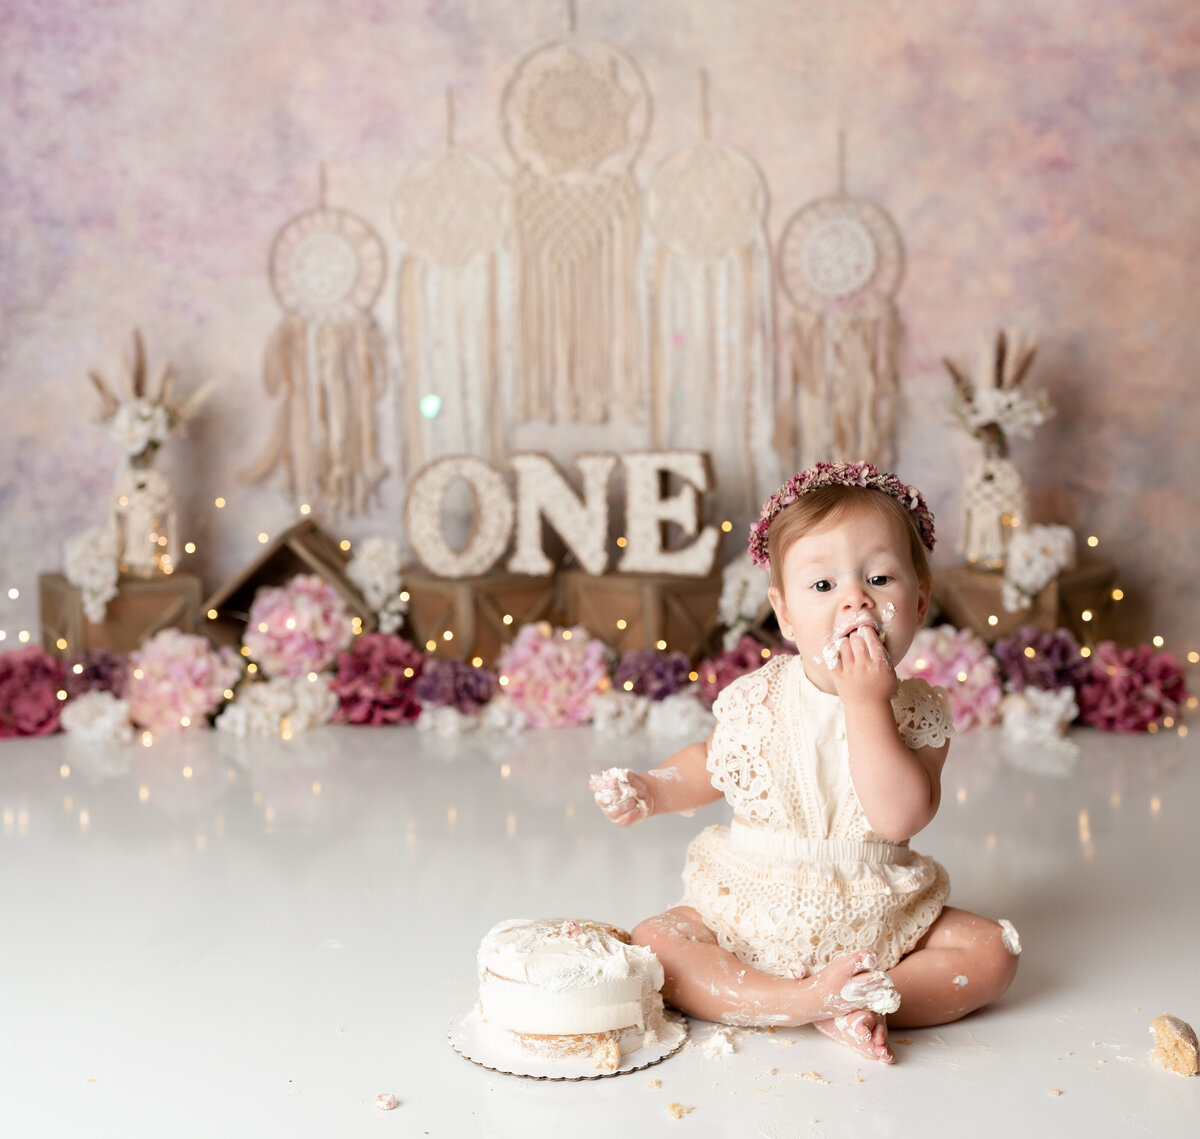 Boho themed cake smash in West Palm Beach, FL newborn and cake smash photography studio. Baby girl in cream lace outfit is eating a fist full of cake. In the background there are macrame wall hangings, flowers, and subtle twinkle lights.